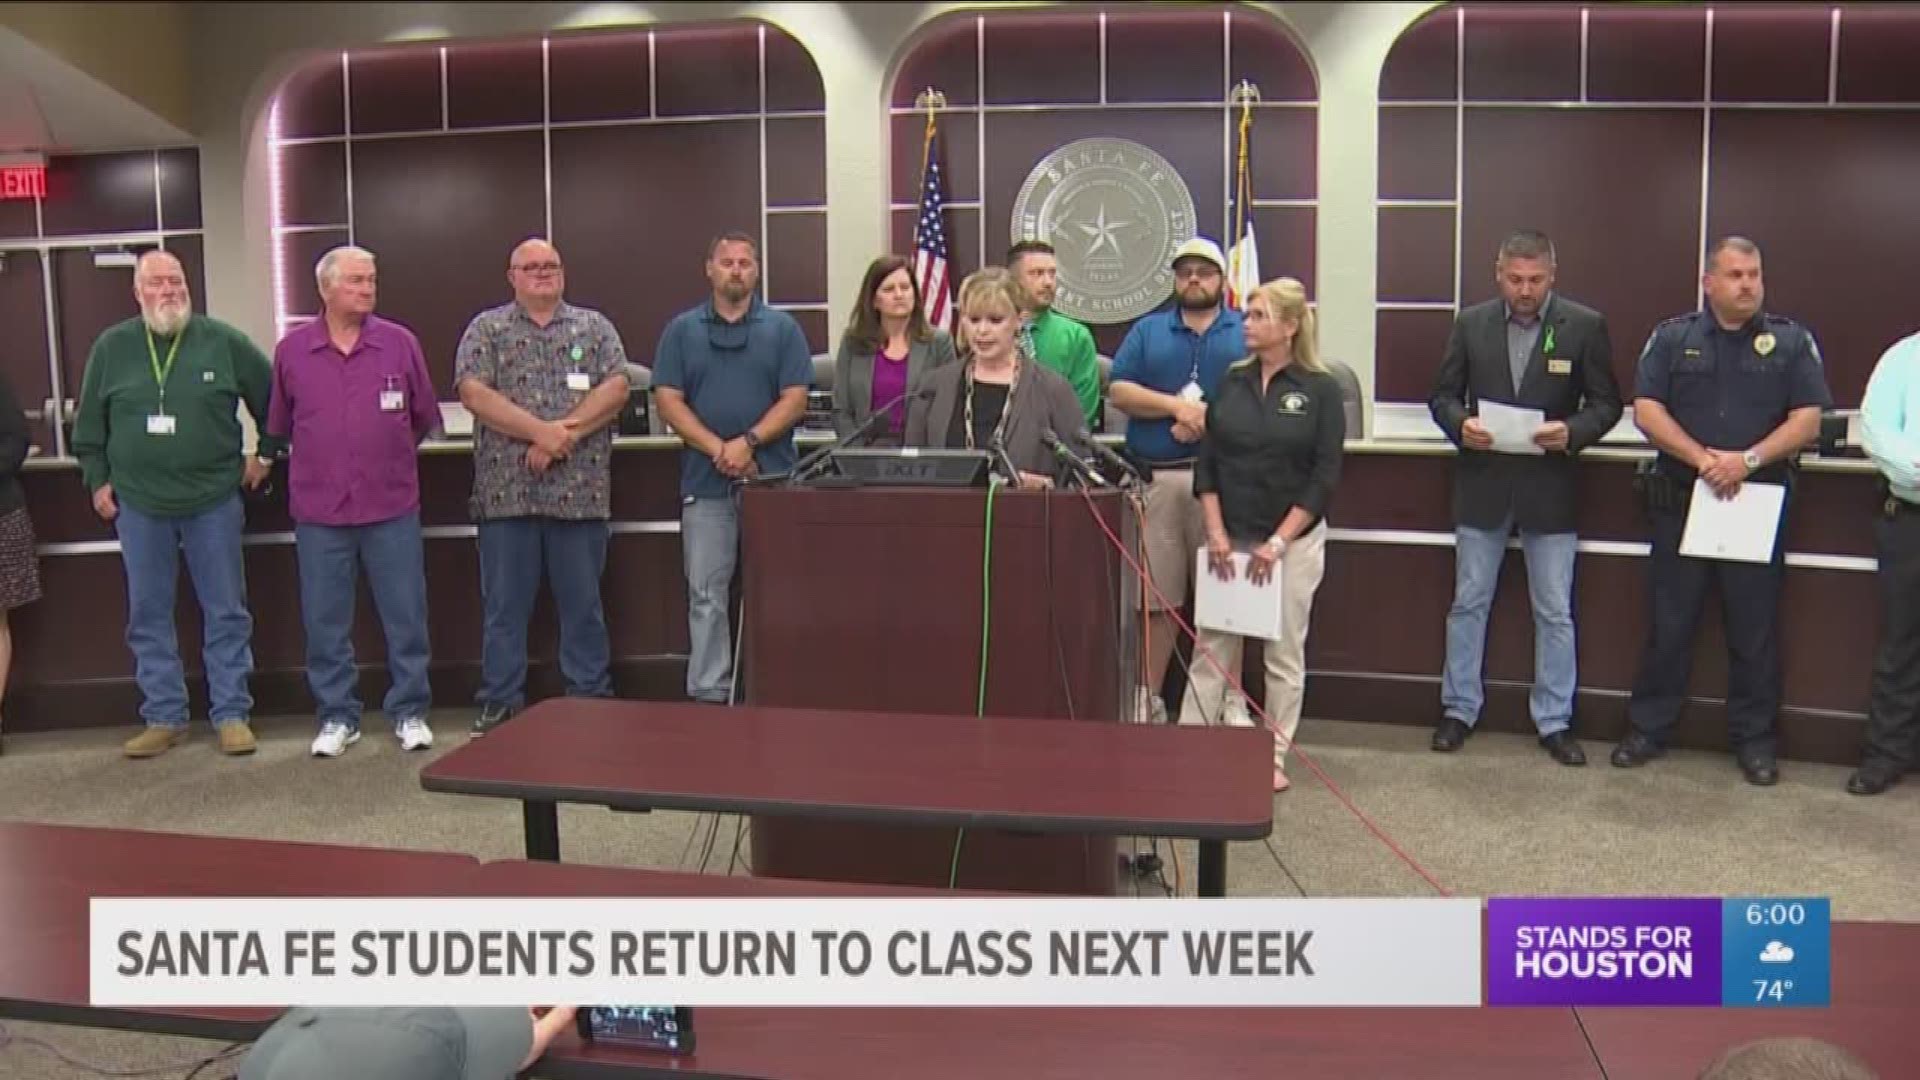 Teachers and support staff were to return on Wednesday, May 23, and students were to return to class on Tuesday, May 29, district officials said.